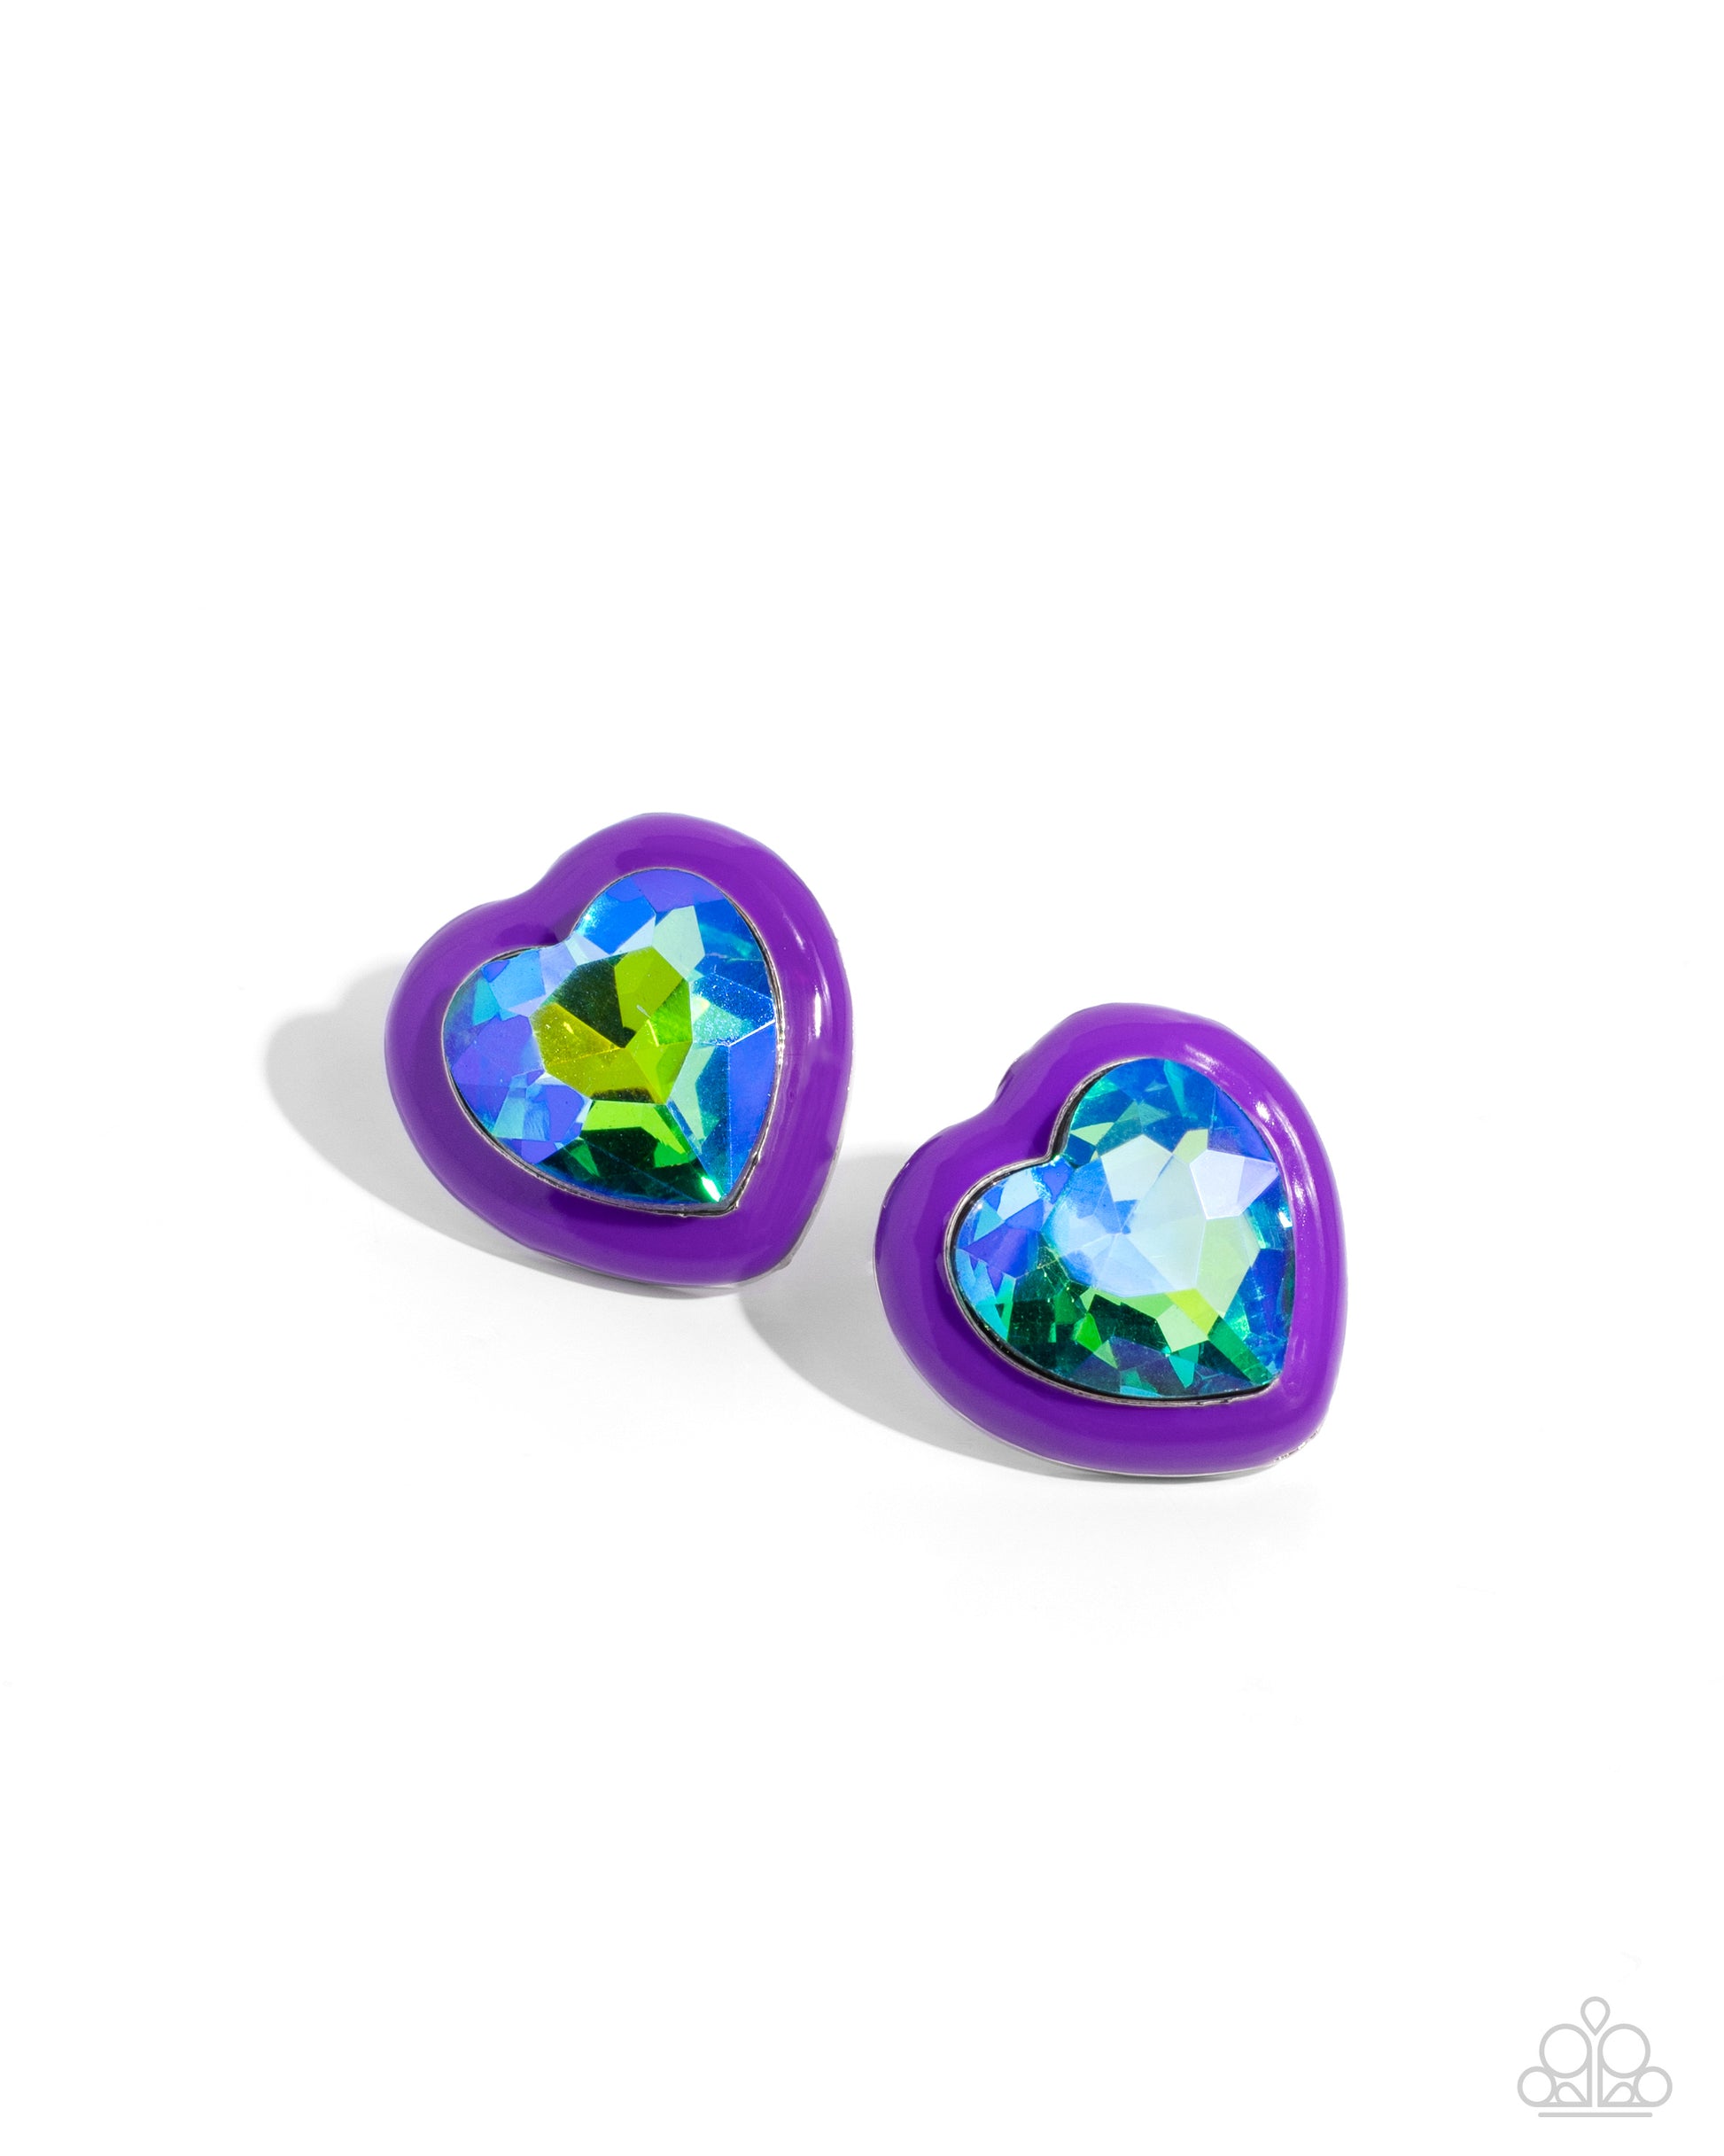 <p>Pressed in a border of purple paint, an oversized UV shimmery heart gem glimmers from the ear, resulting in a romantic-inspired display. Earring attaches to a standard post fitting.</p> <p><i> Sold as one pair of post earrings. </i></p> <br><b> Get The Complete Look! </b> <br>Necklace: "Heartfelt Hope - Purple" (Sold Separately)